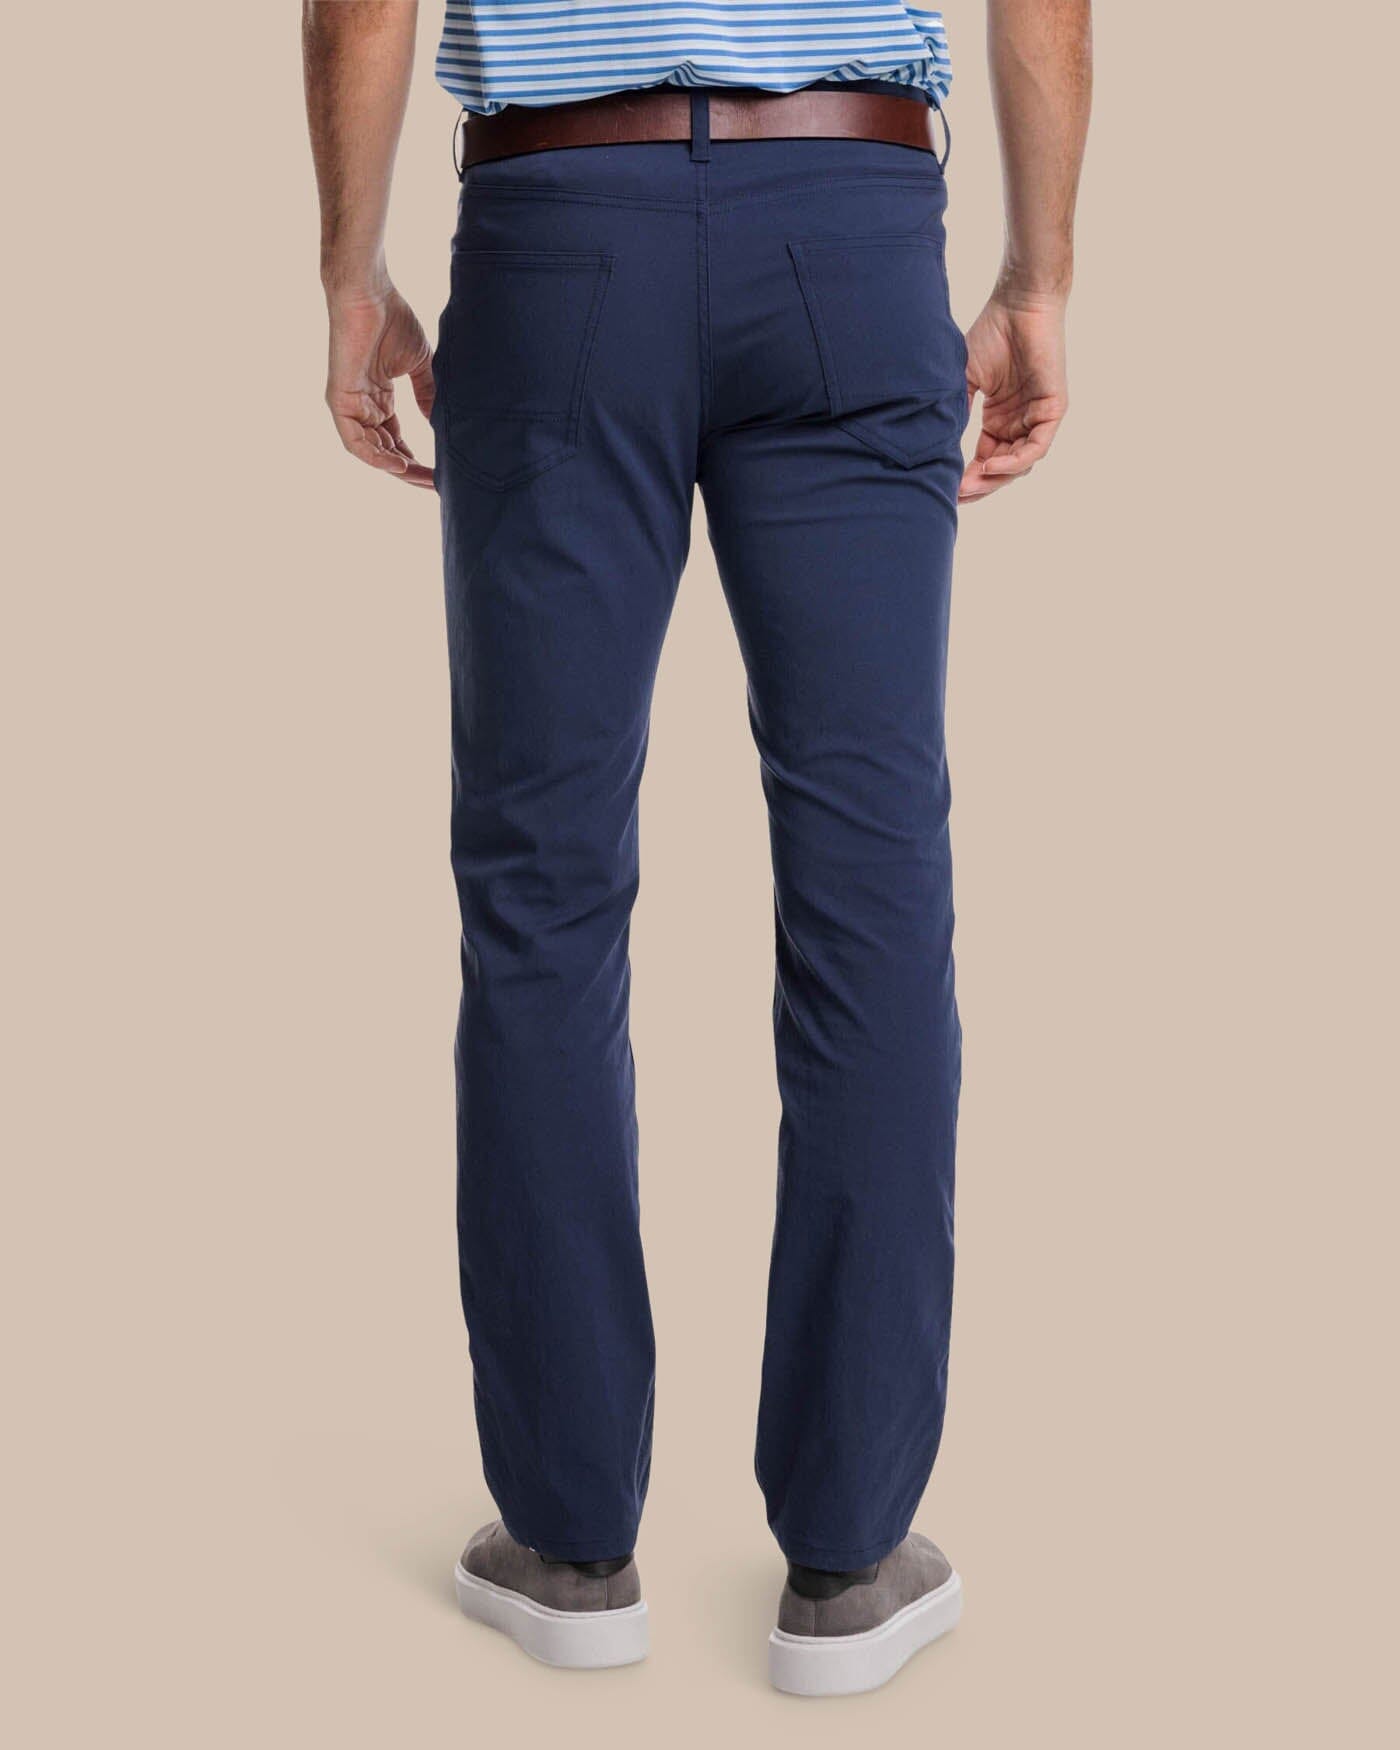 Men's Business Casual Pants - Navy Slim Fit Chino Pants – Southern